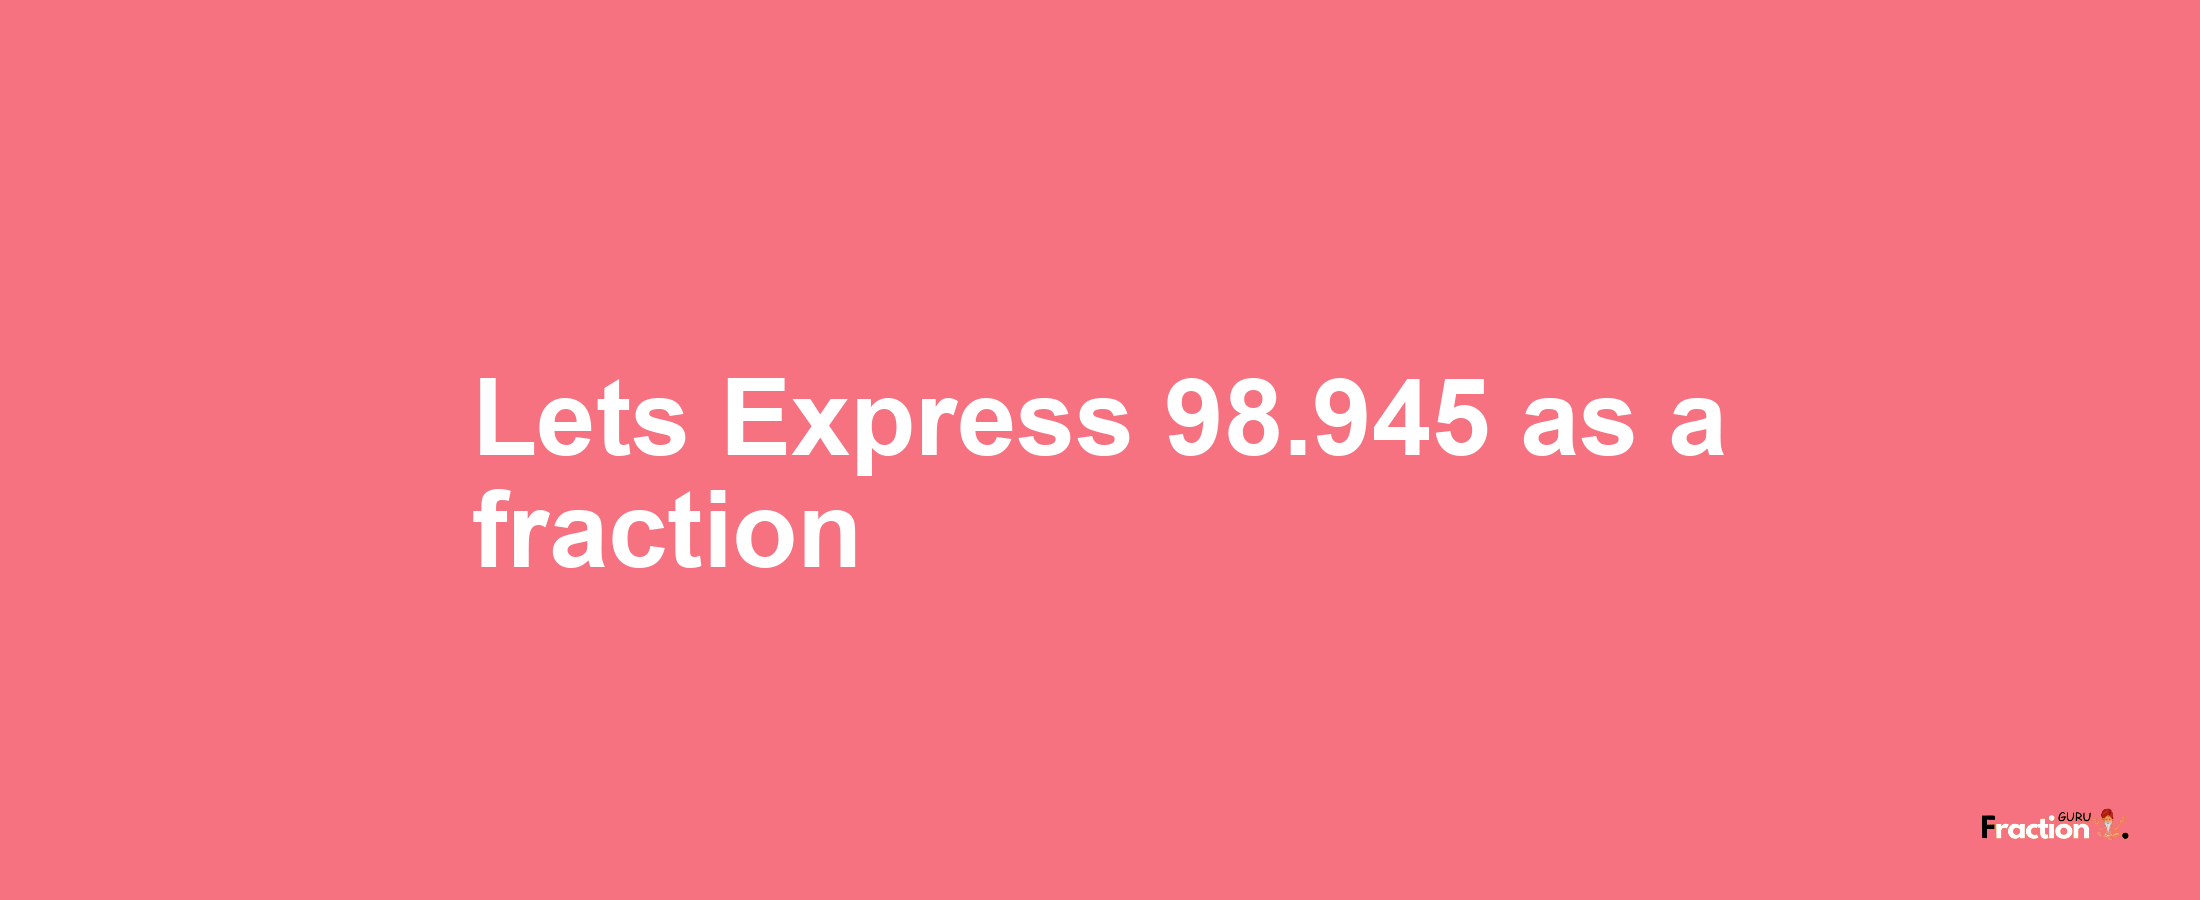 Lets Express 98.945 as afraction